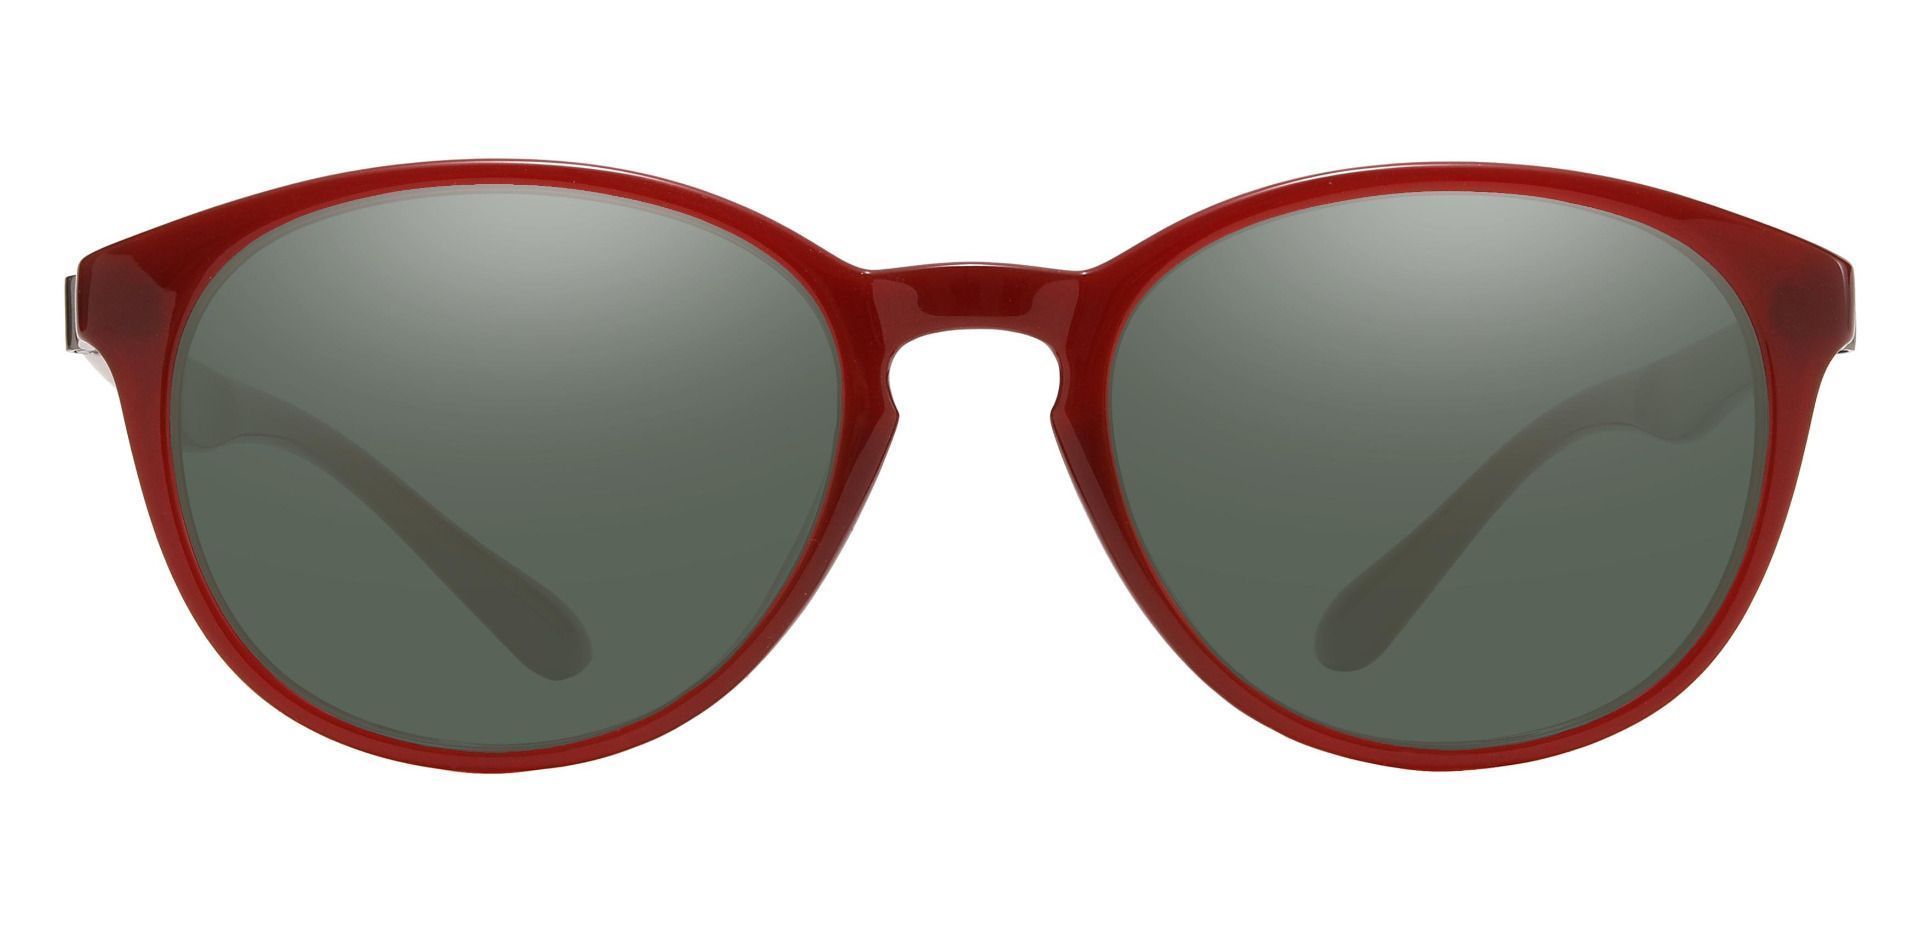 Celia Oval Reading Sunglasses - Red Frame With Green Lenses